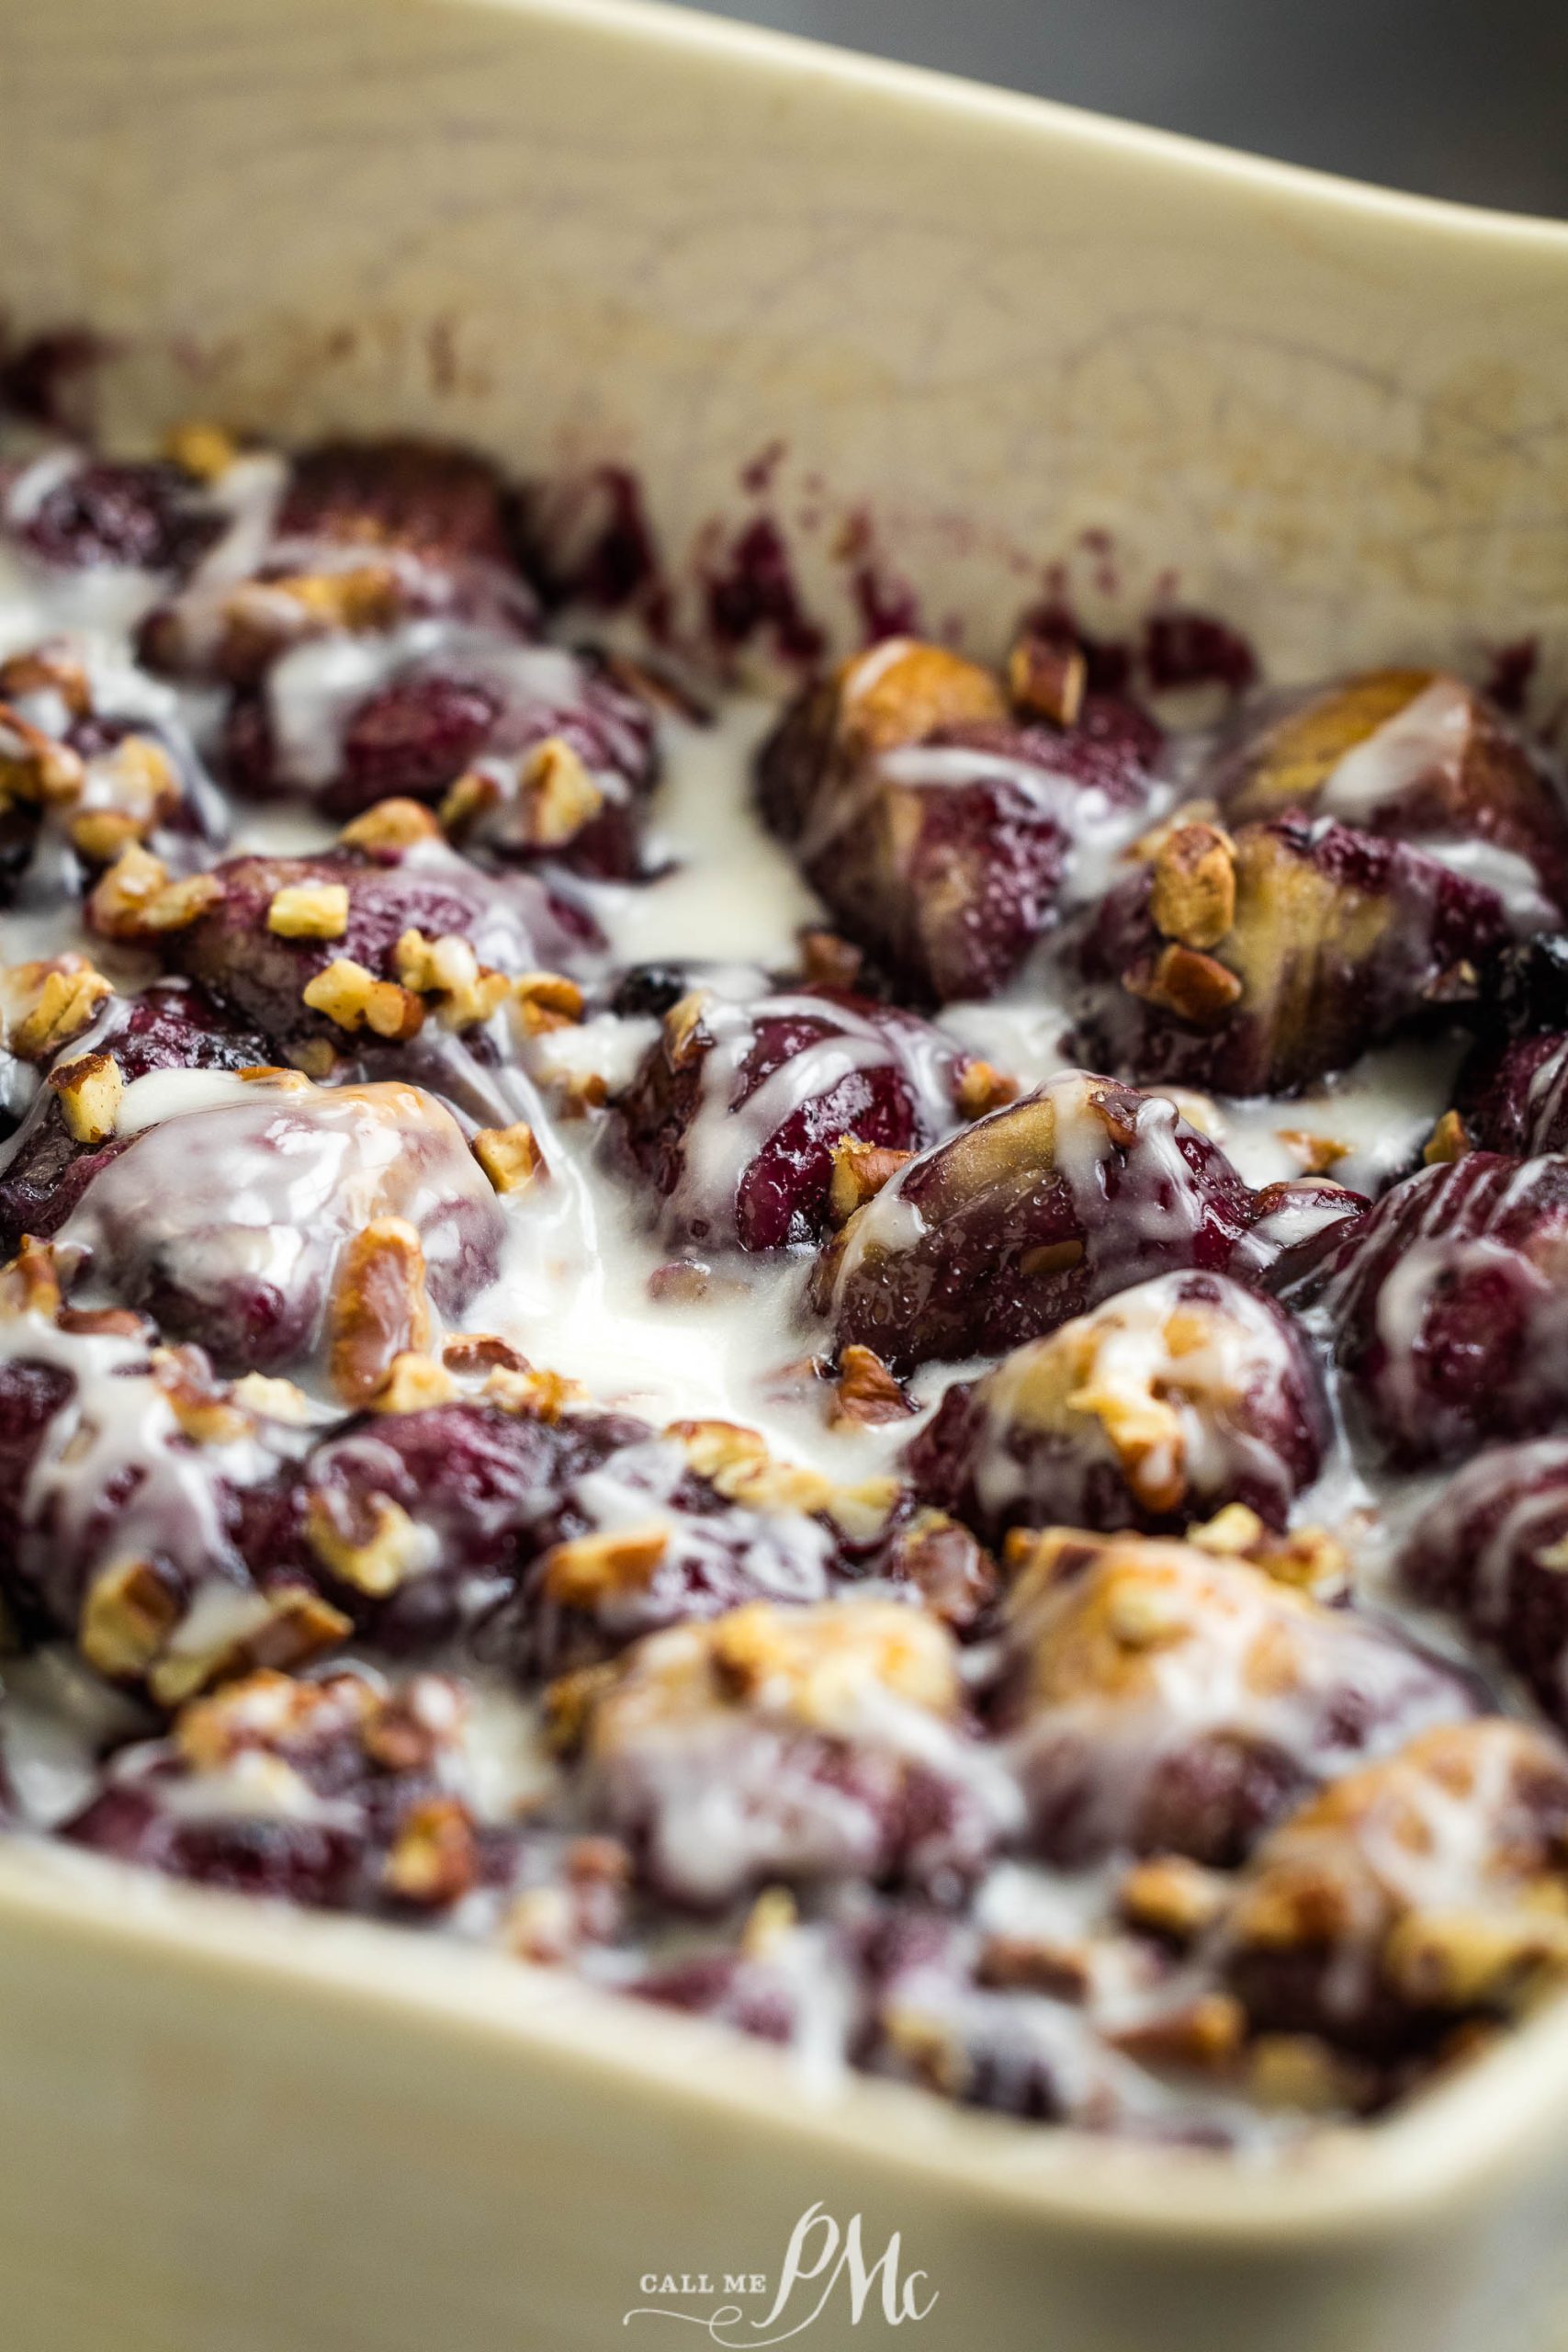 A close-up of a baked dish filled with Blueberry Cobbler Bubble-Up covered in white icing and sprinkled with chopped pecans.